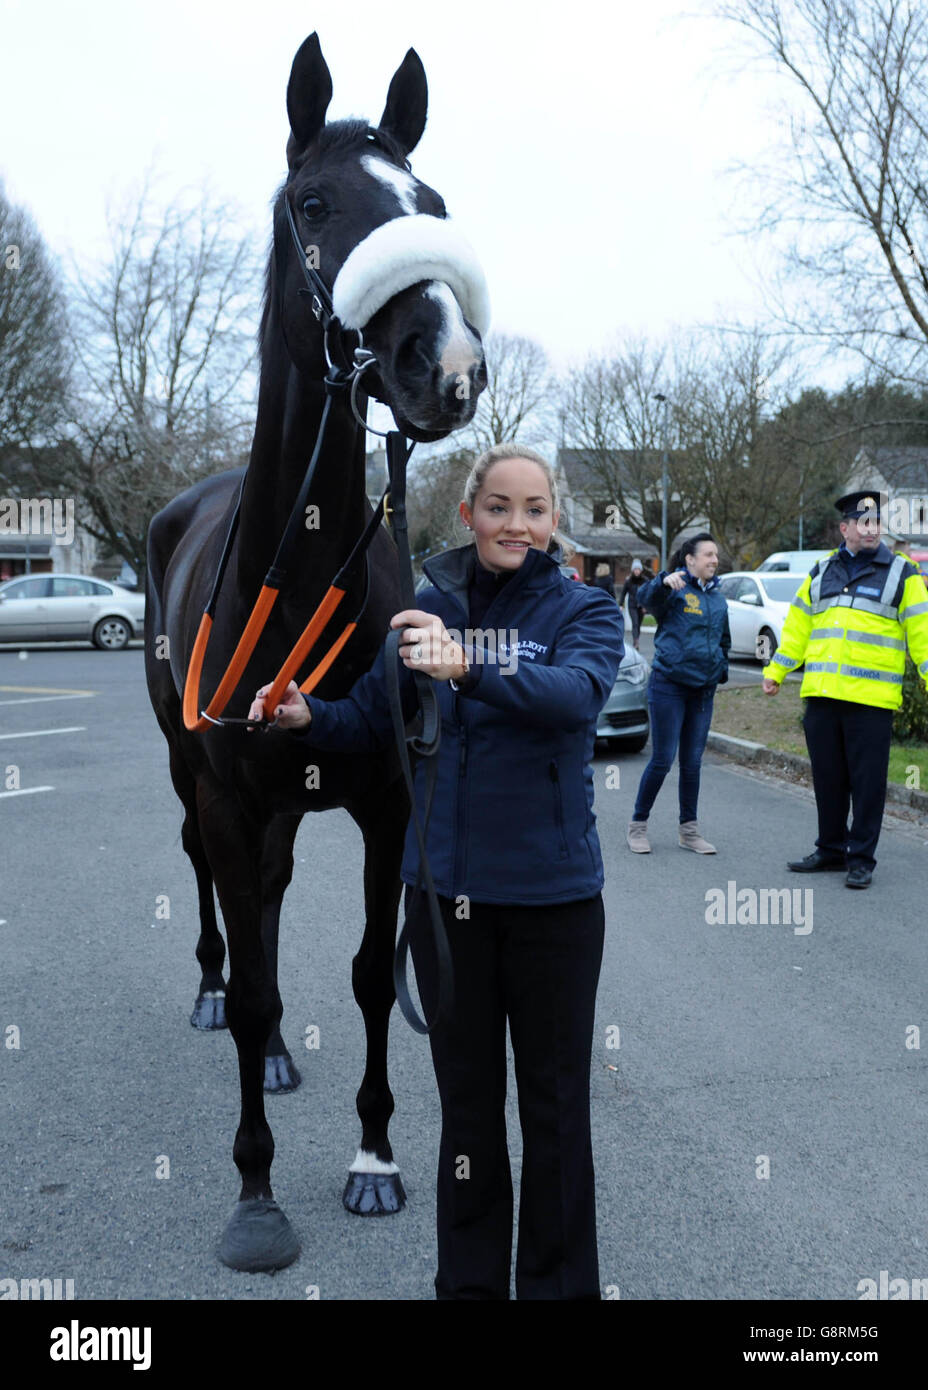 Gold Cup Winner Photocall - Summerhill. Groom Louise Dunne and Don Cossack outside Shaw's Pub in Summerhill, County Meath, Ireland. Stock Photo